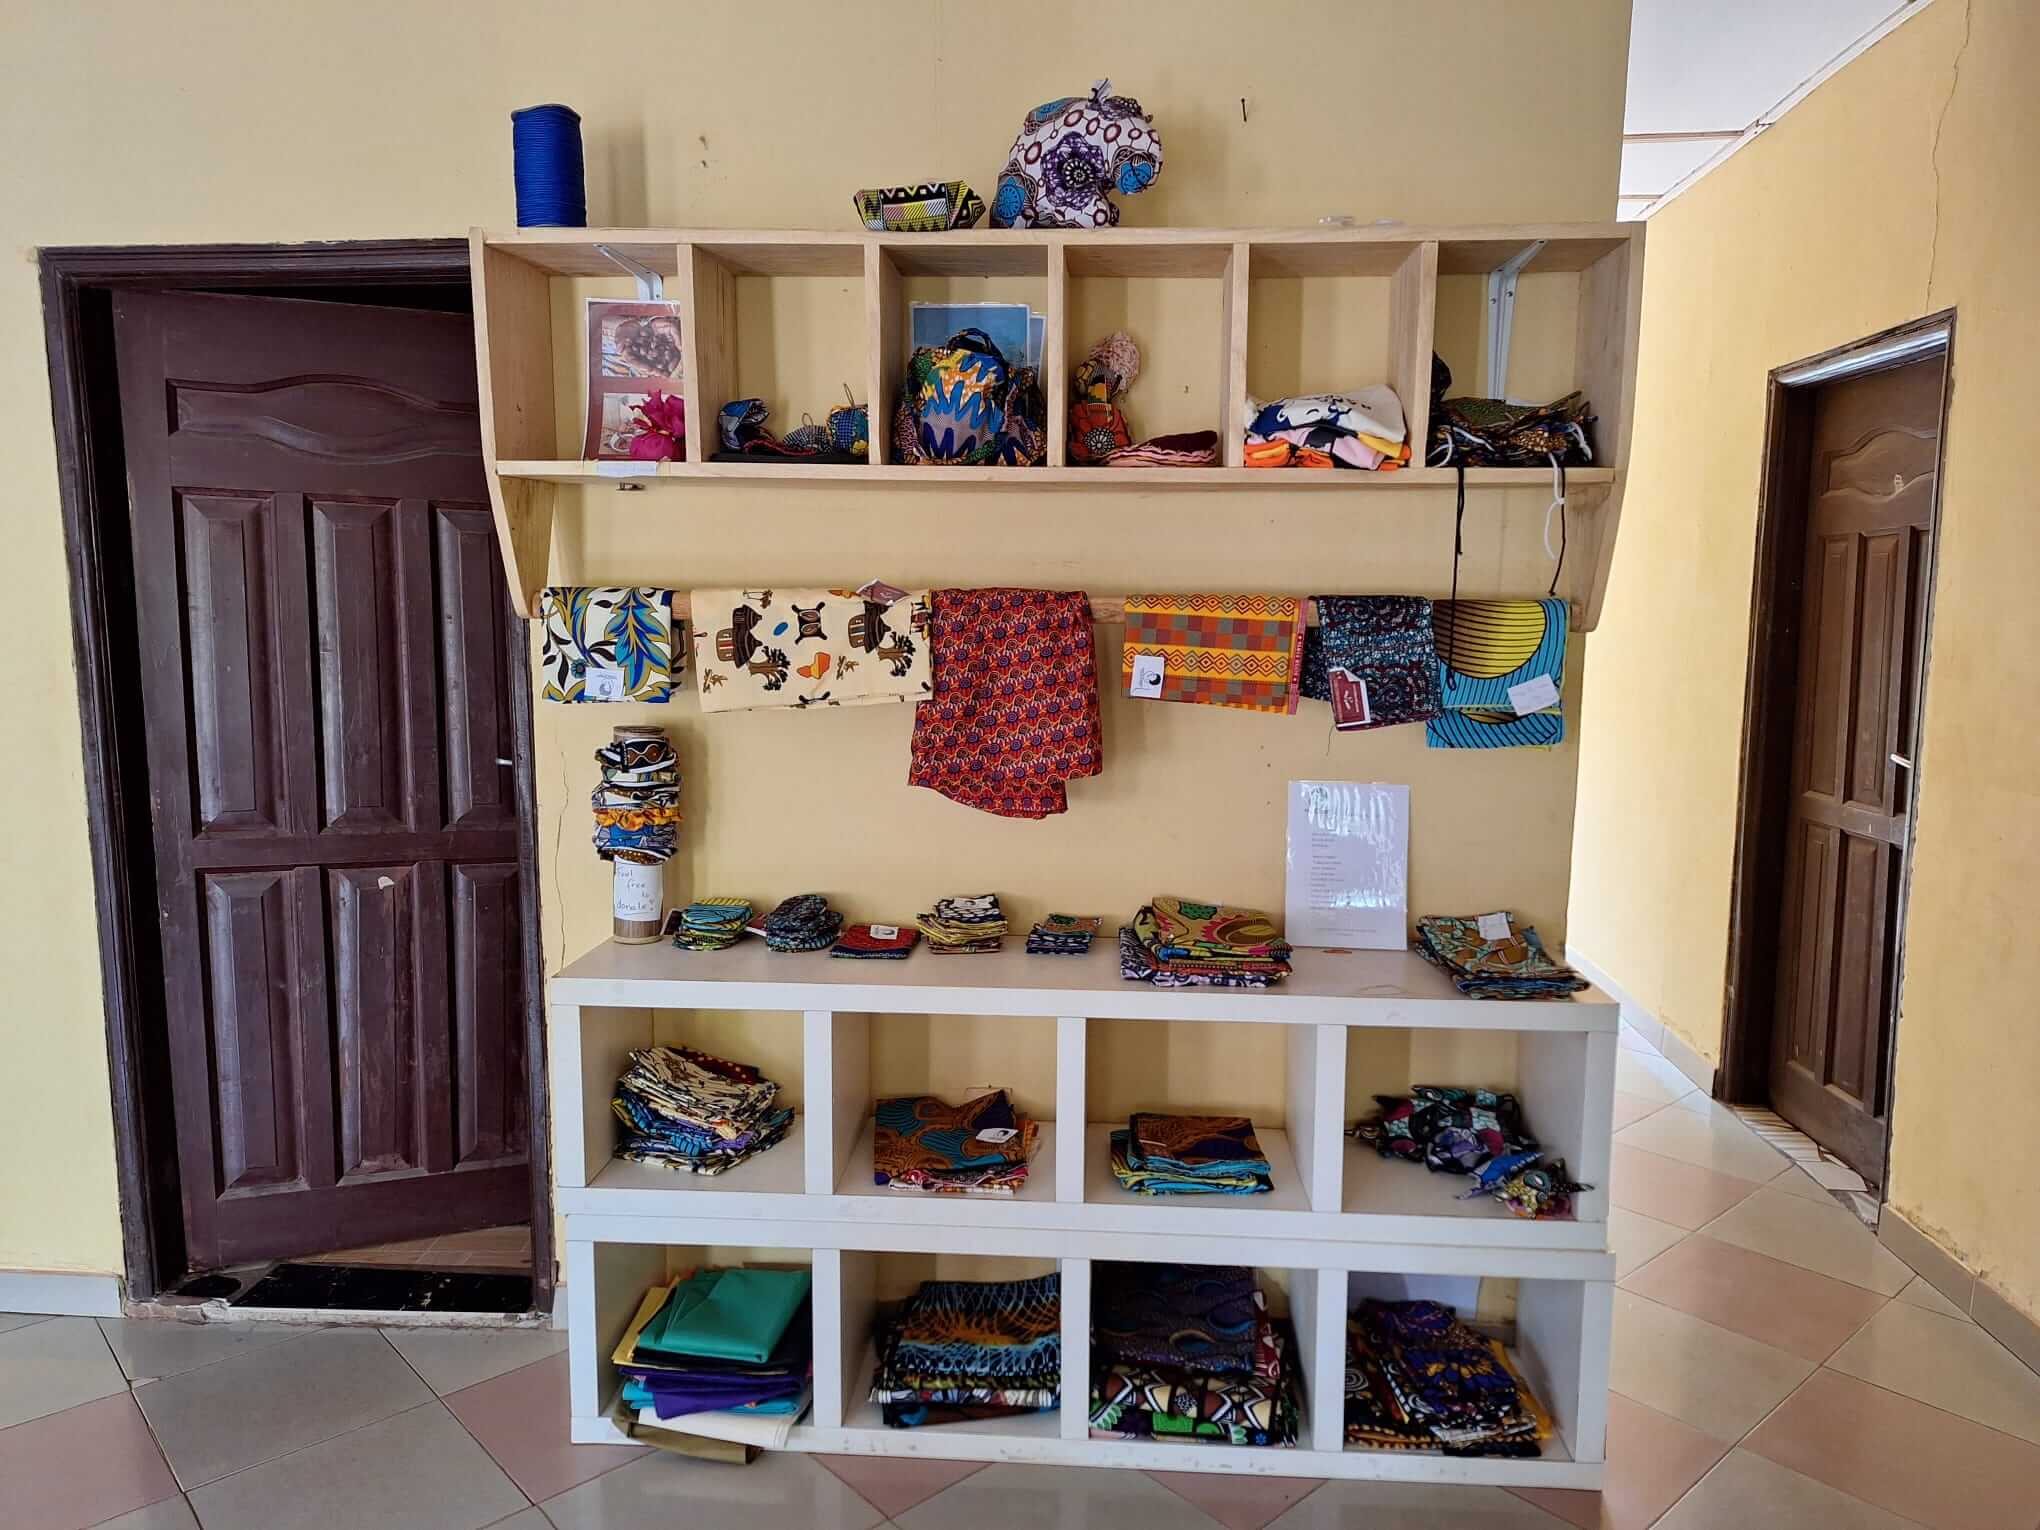 support us by buying the products at BWO hostel